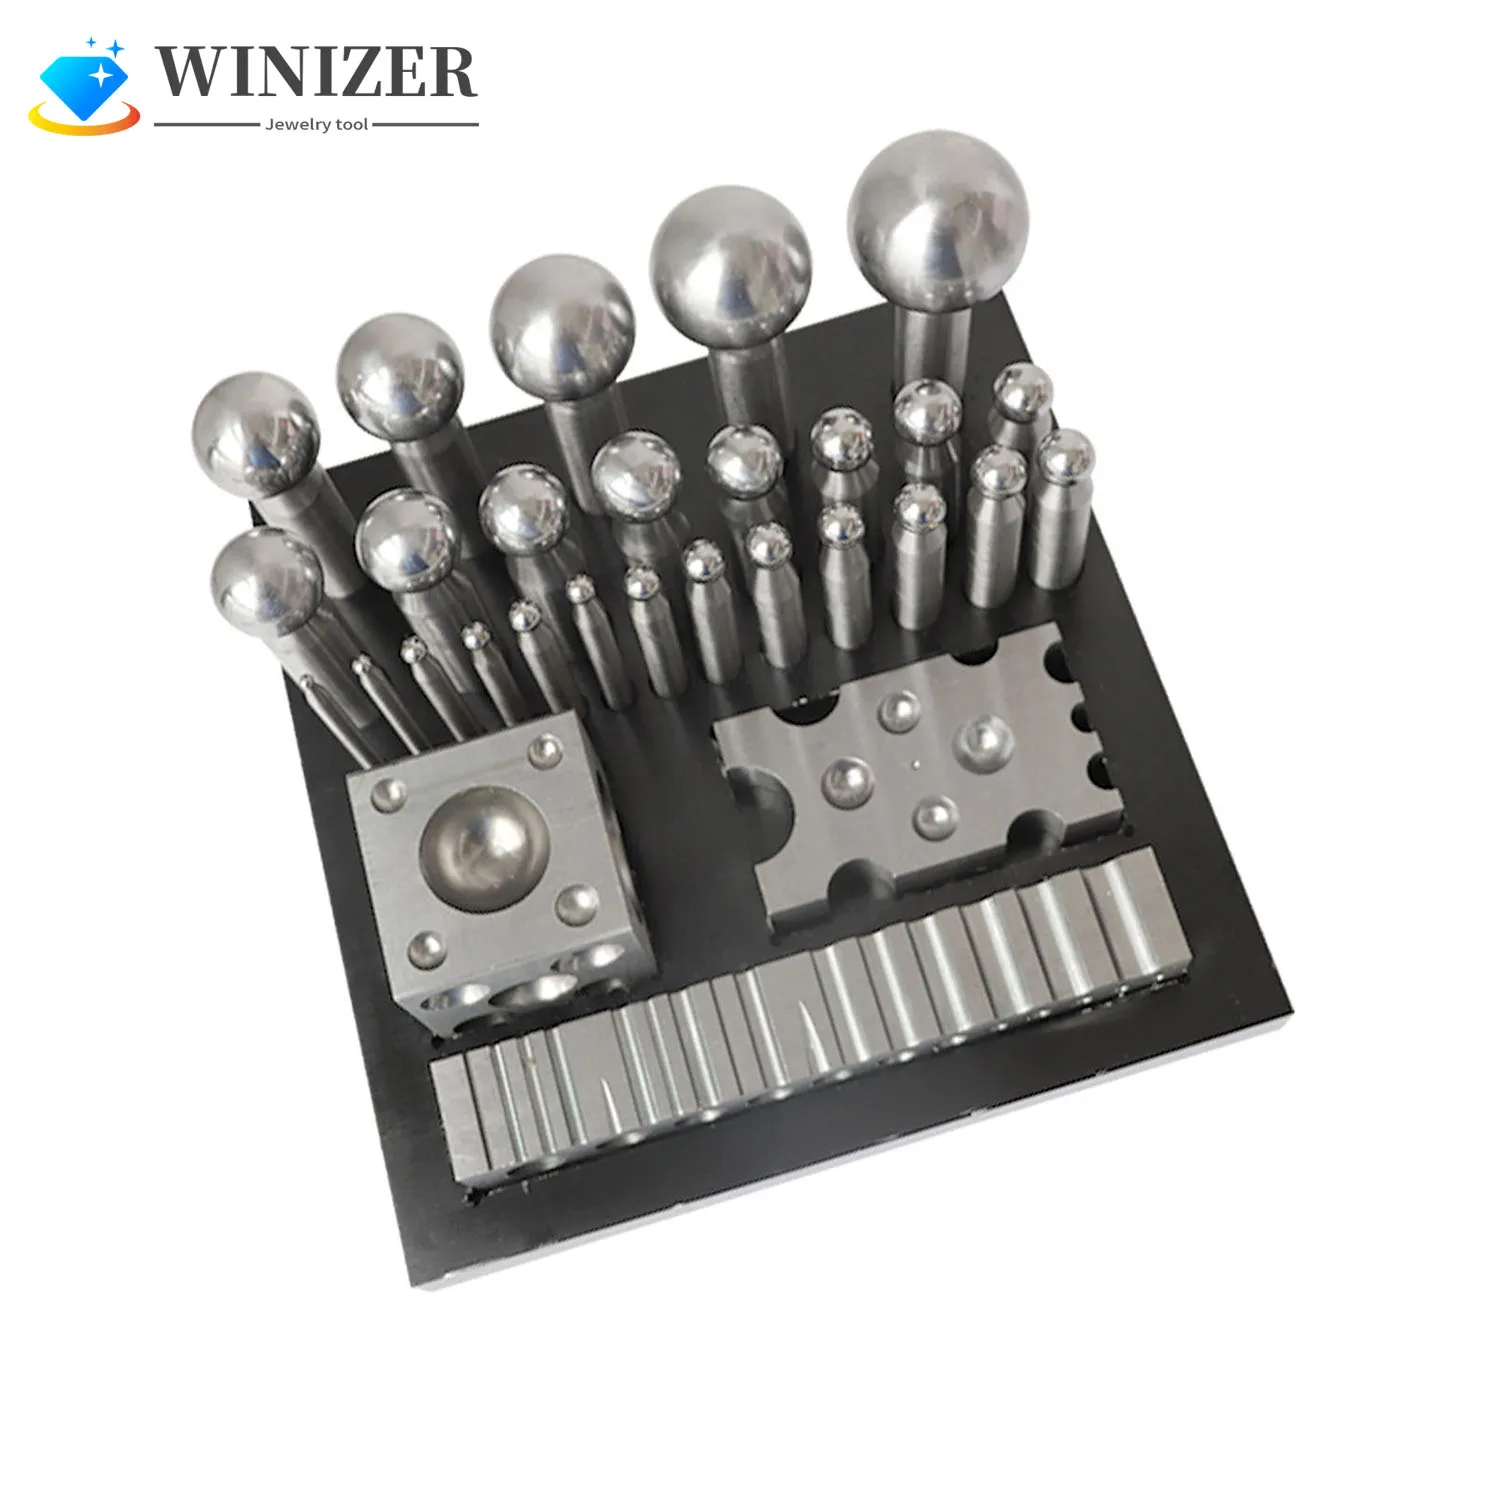 29Pcs Steel Dapping Block 5MM to 50MM Jewelry Doming Tool Square Dapping Block for Shaping Texturizing Jewelry Metal Forming Kit